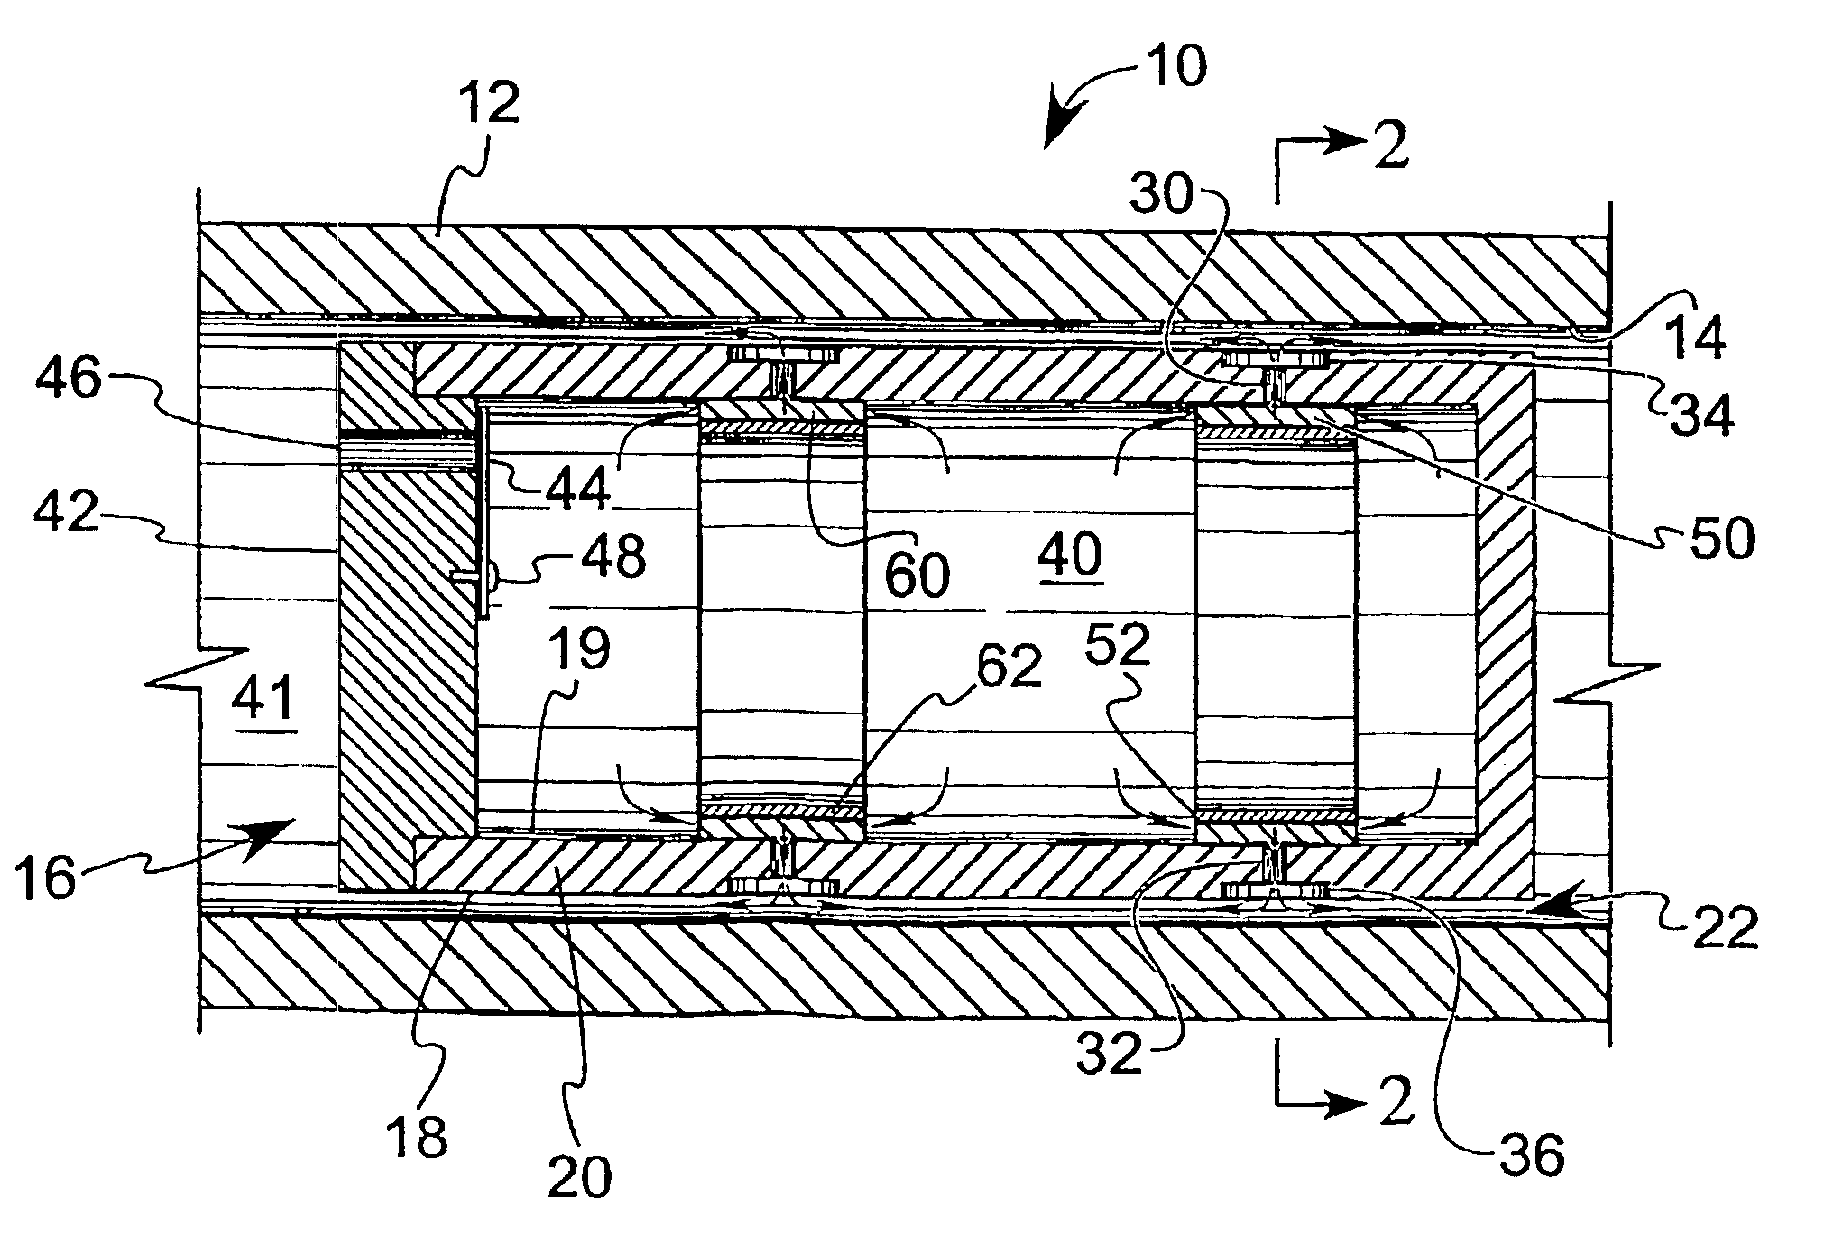 Porous restrictor for gas bearing